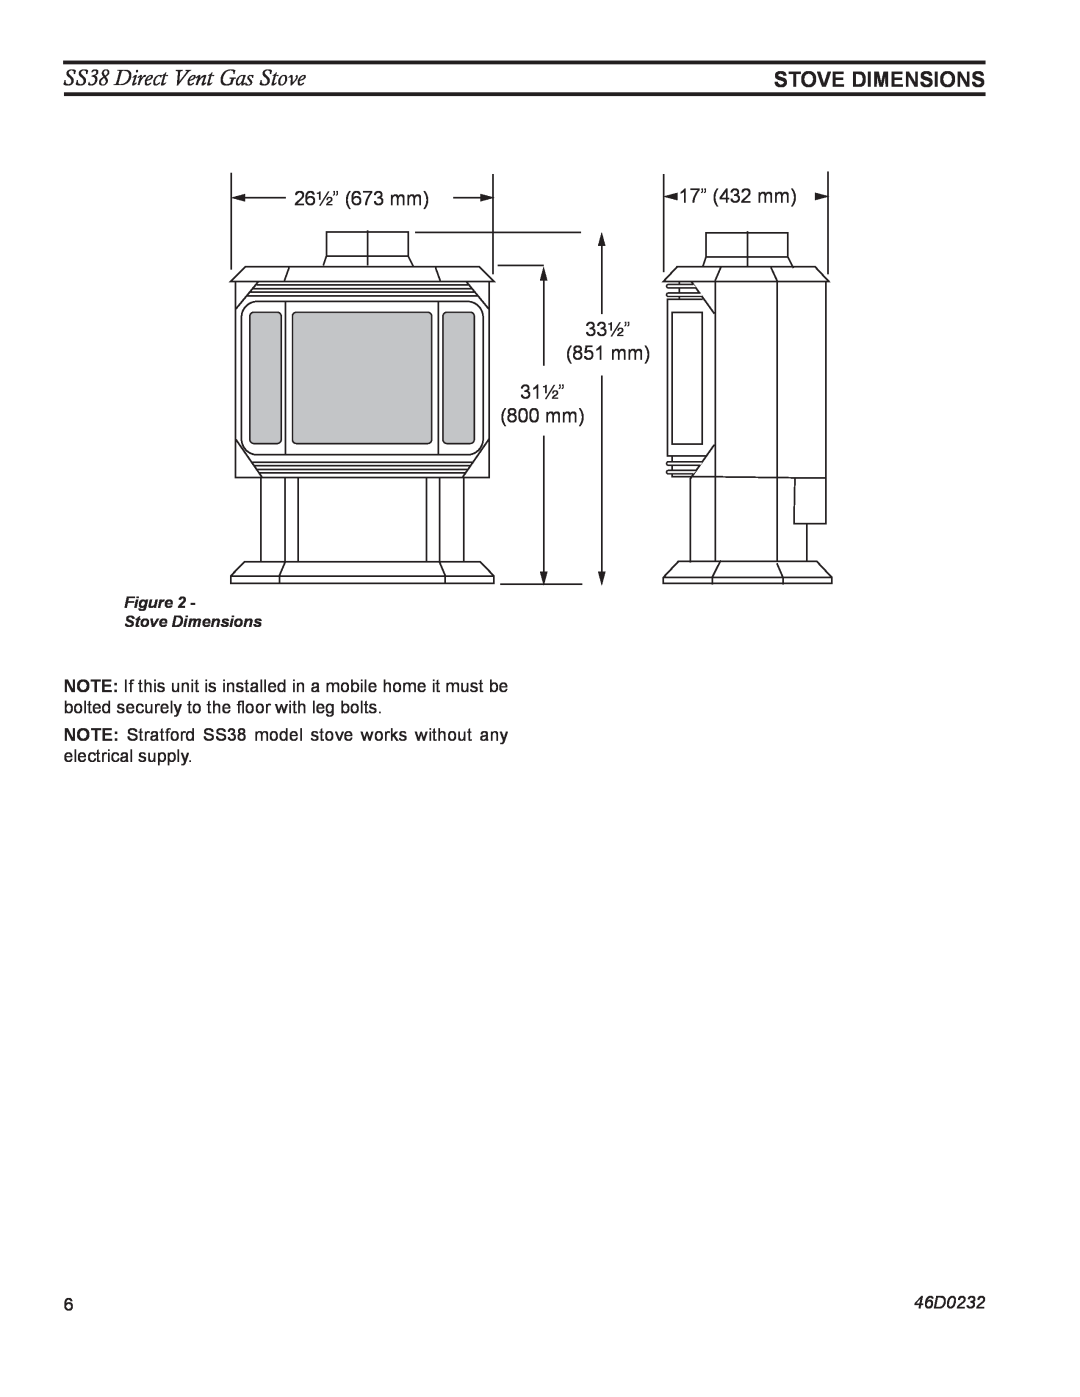 Monessen Hearth operating instructions SS38 Direct Vent Gas Stove, Stove dimensions, 46D0232 